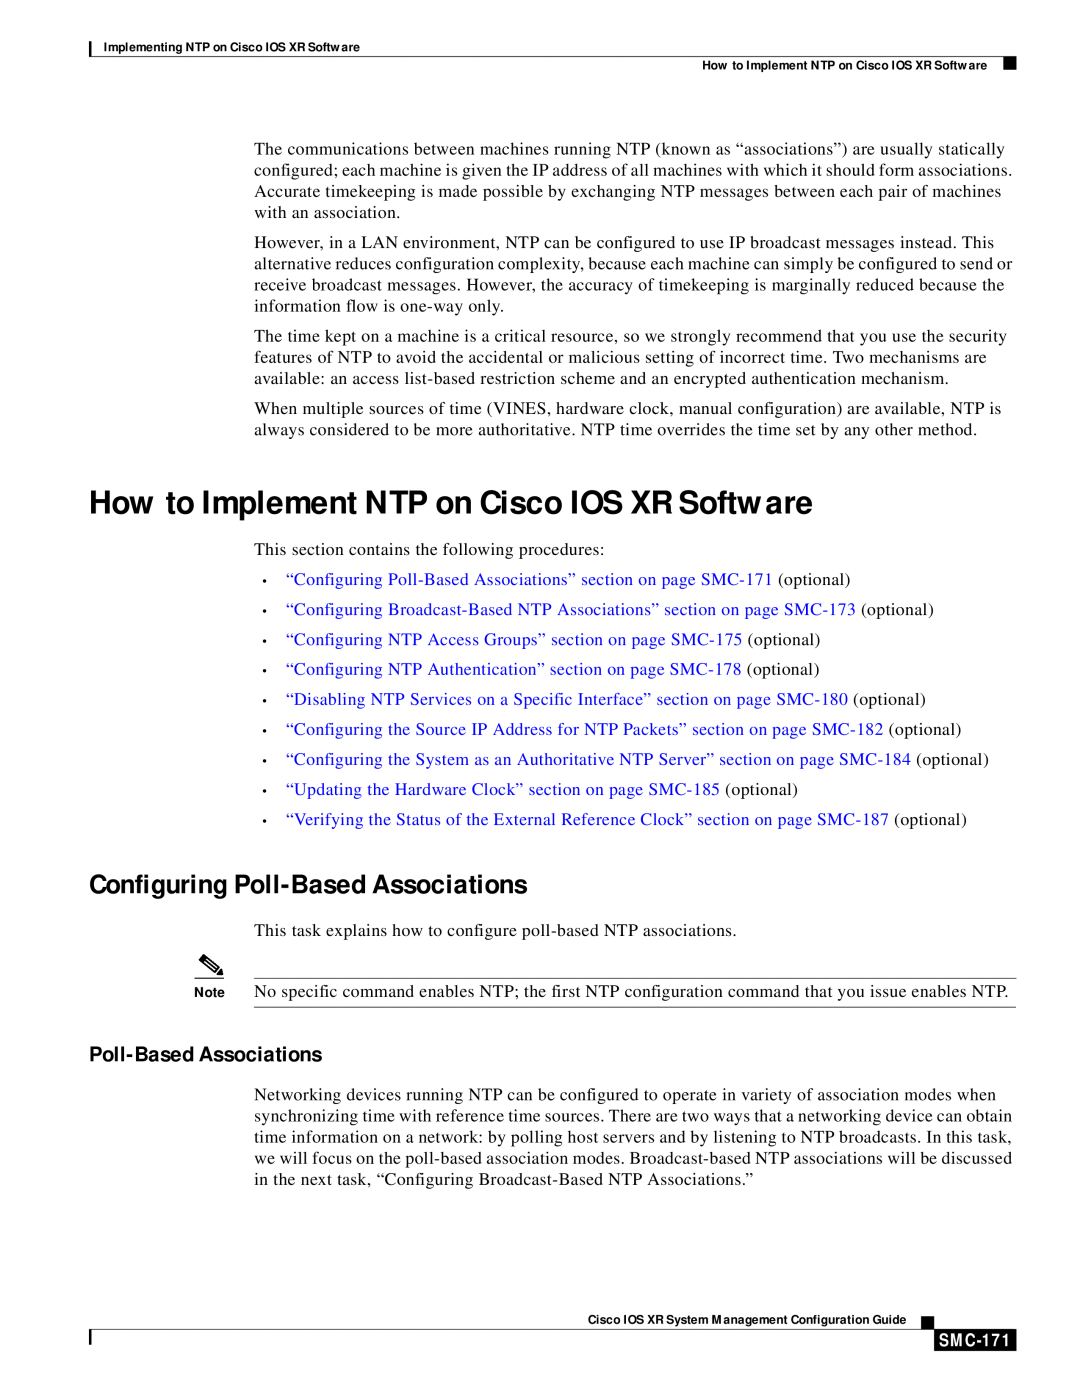 Cisco Systems SMC-169 manual How to Implement NTP on Cisco IOS XR Software, Configuring Poll-Based Associations, SMC-171 